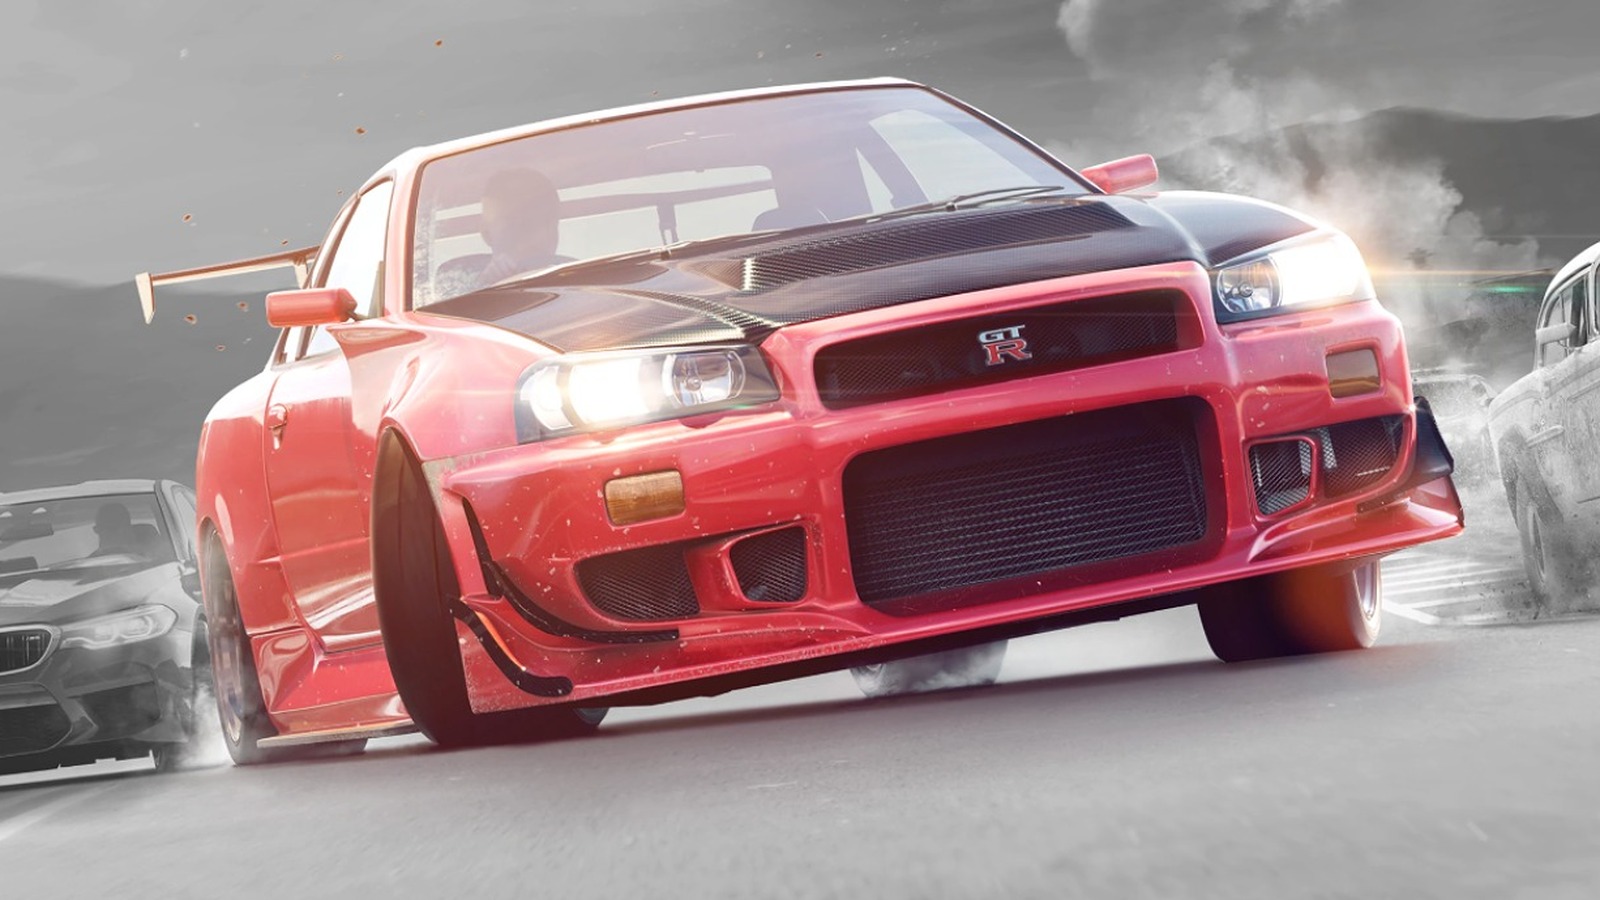 Ranking Every Need For Speed Game From Worst To Best